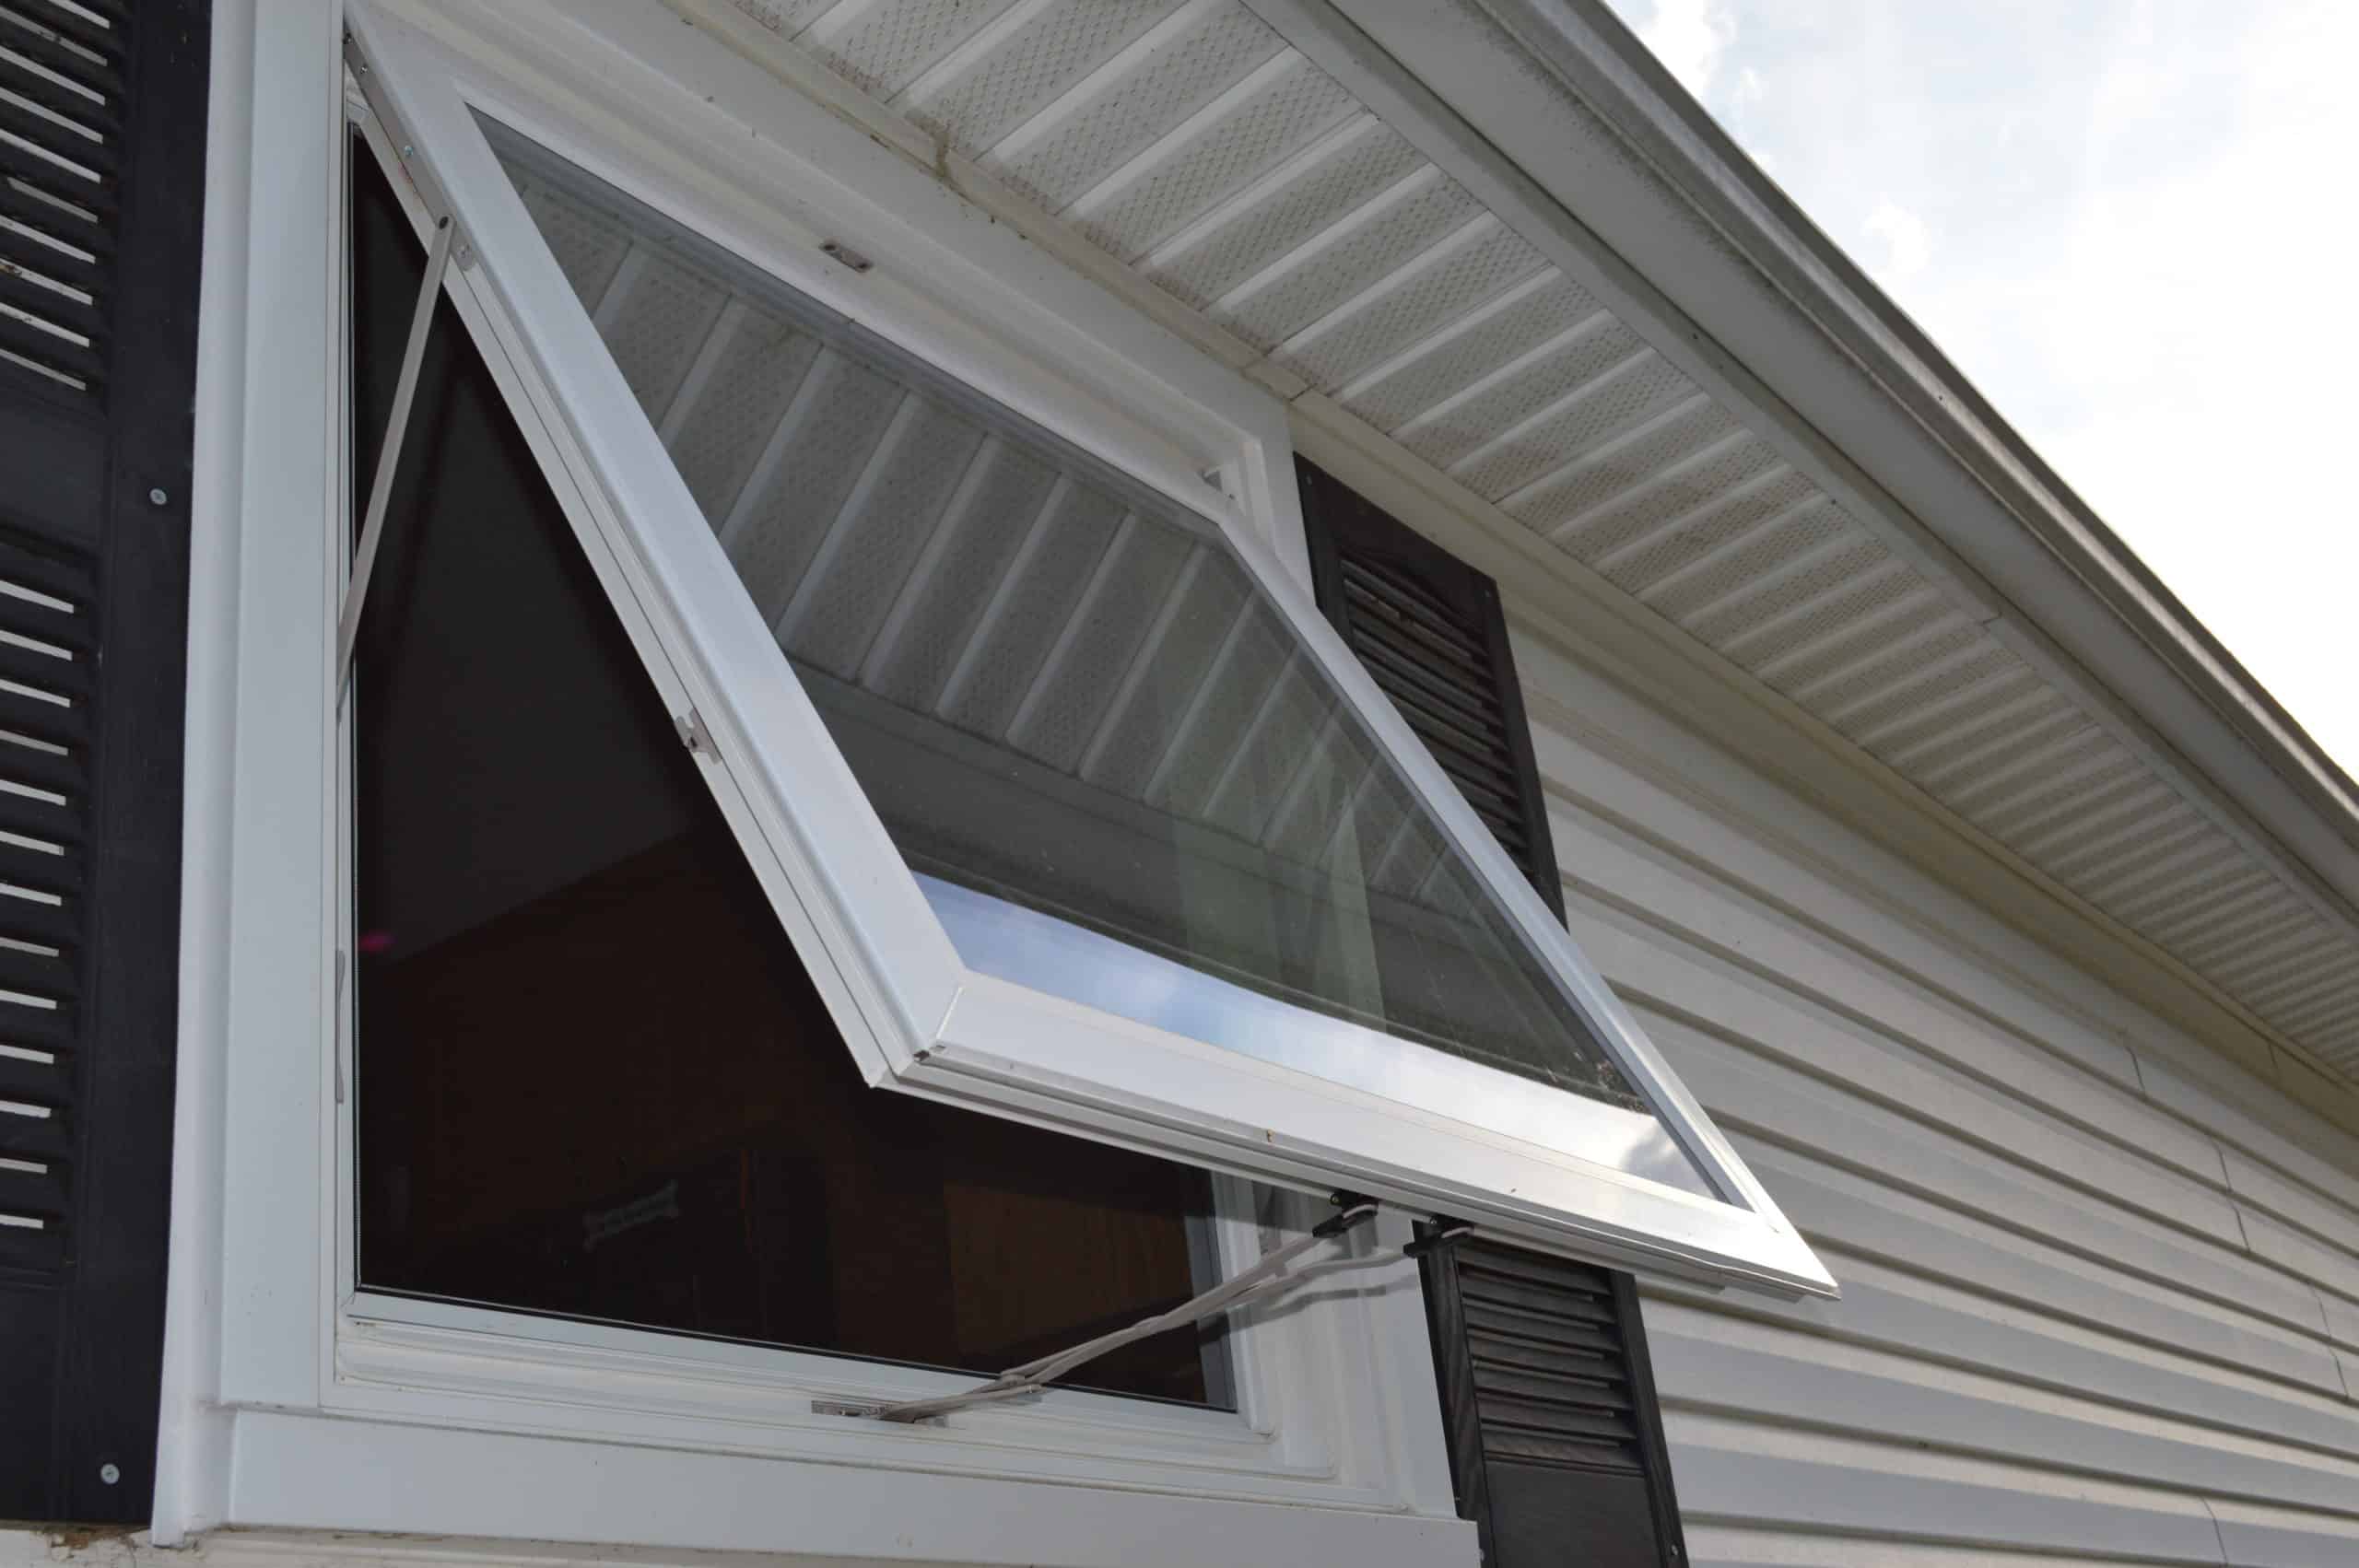 Awning exterior window open